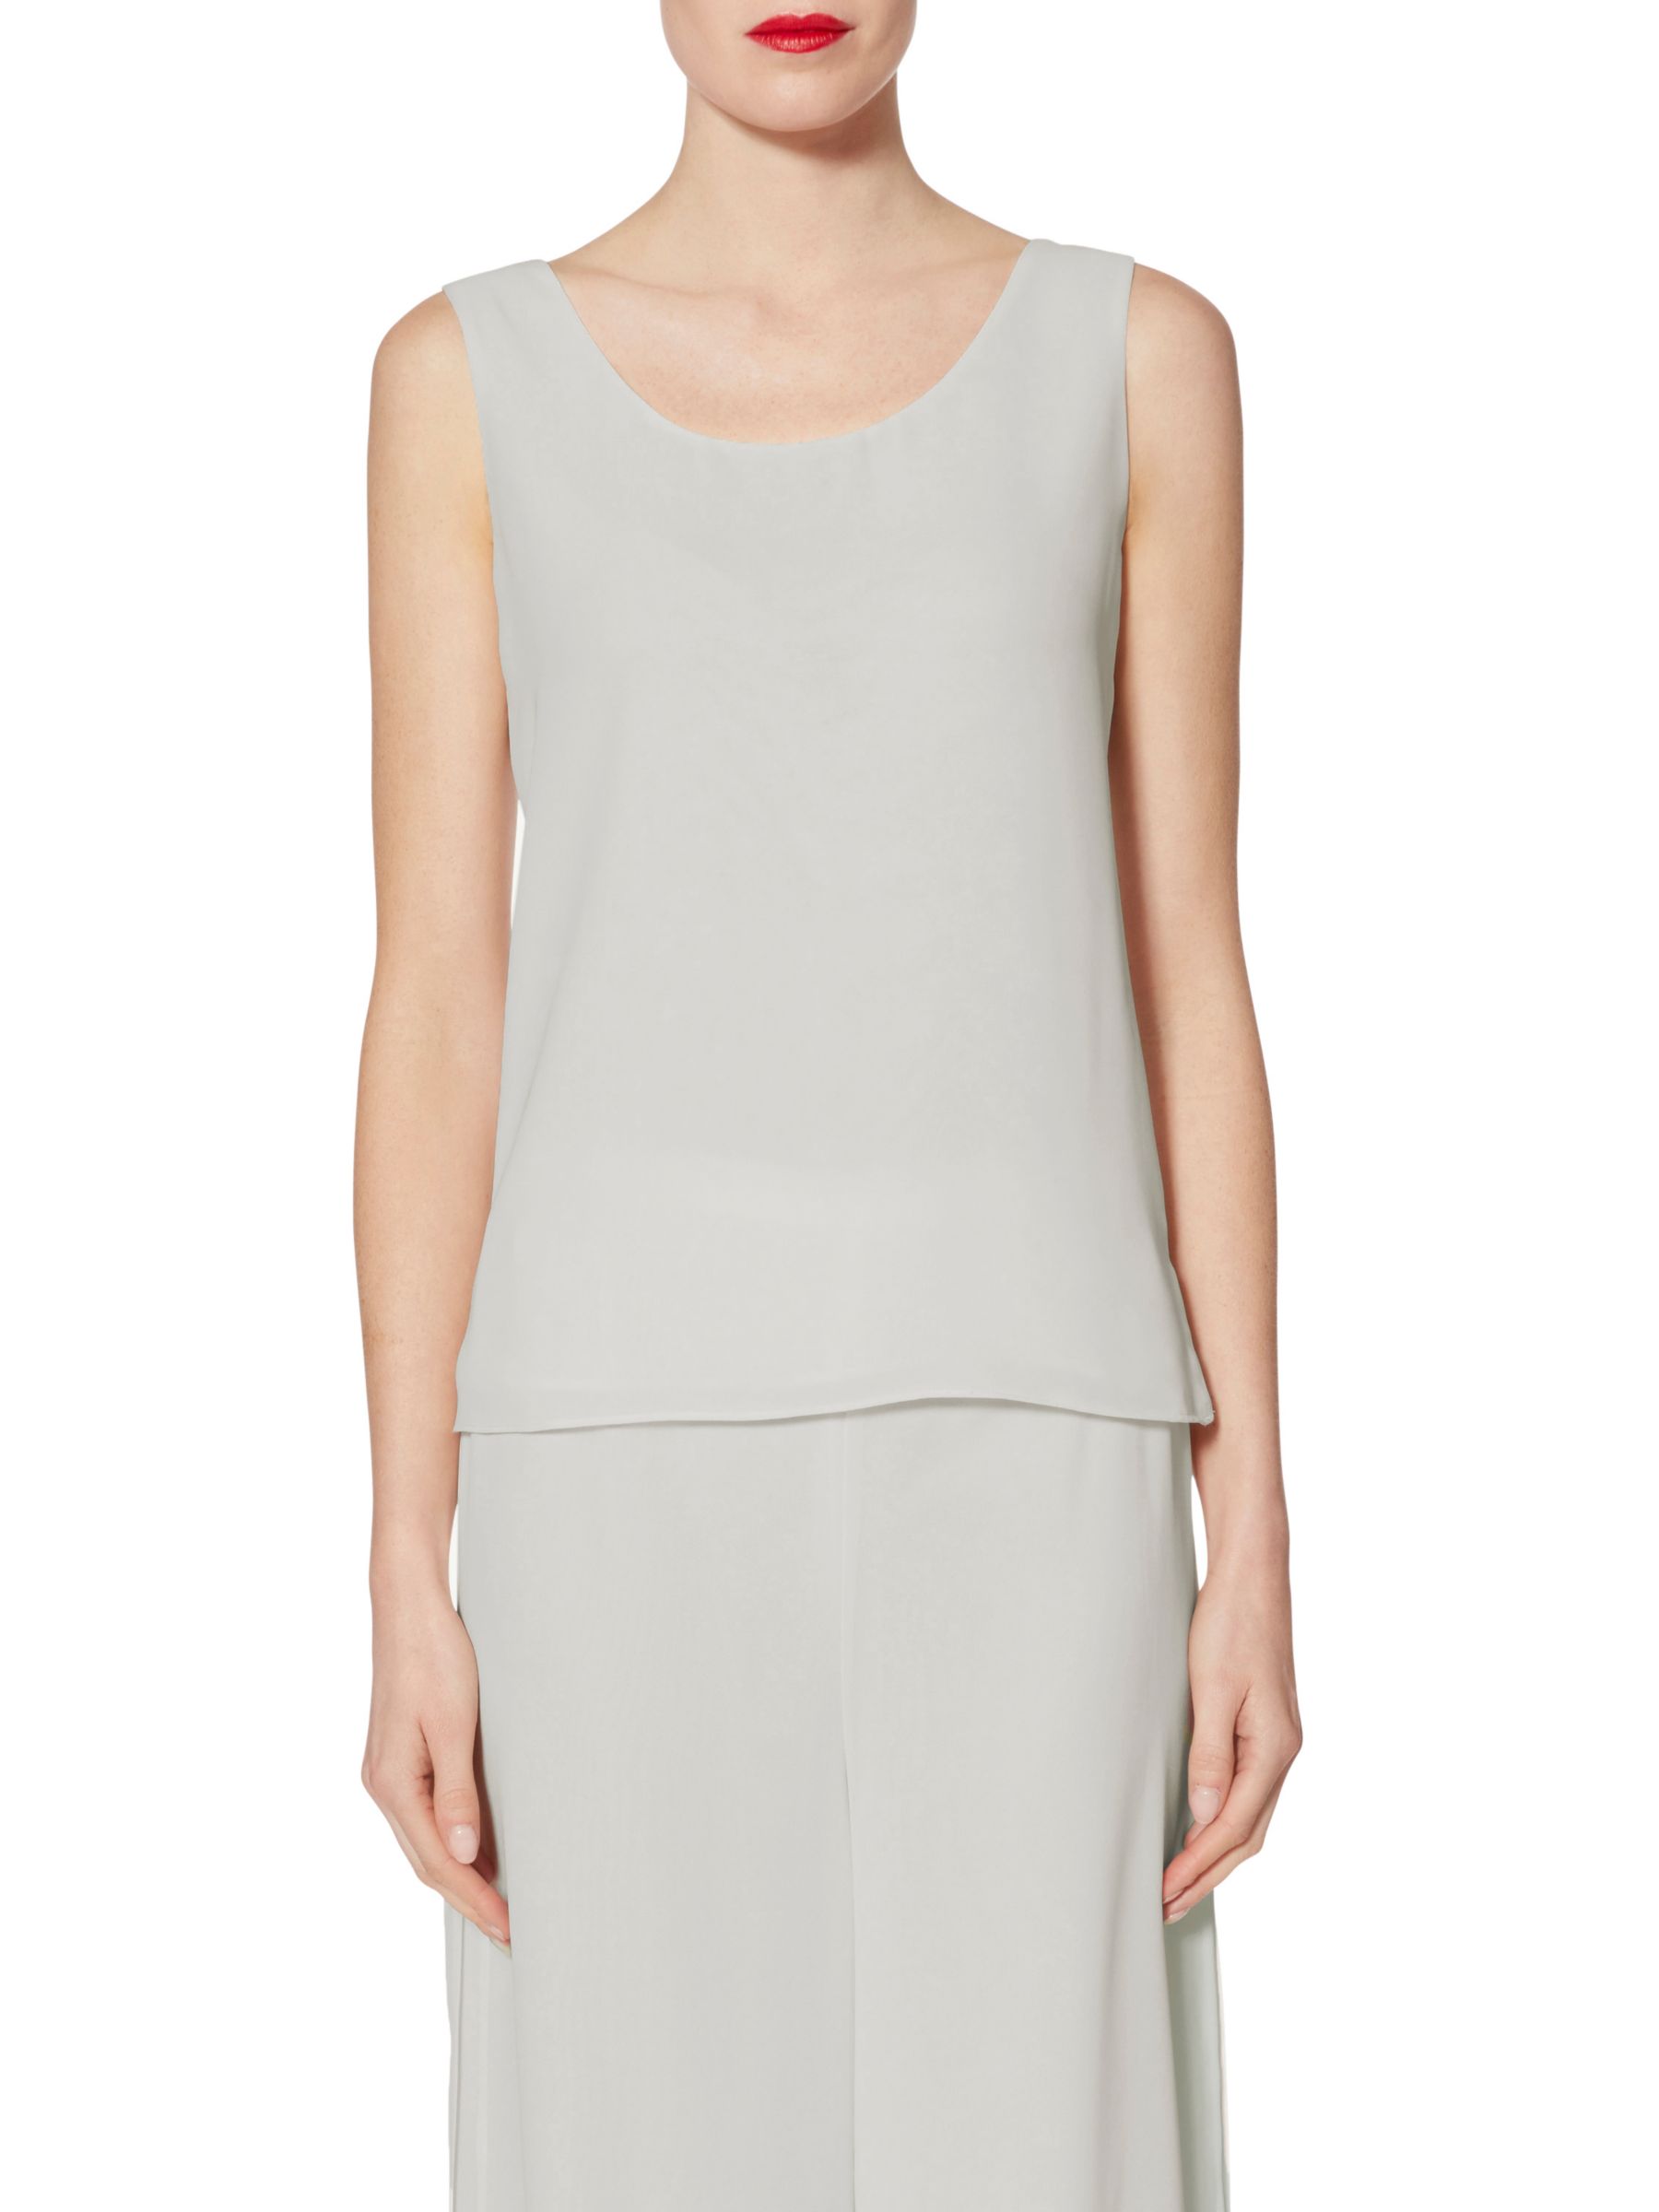 Buy Gina Bacconi Double Layer Chiffon Cami Online at johnlewis.com